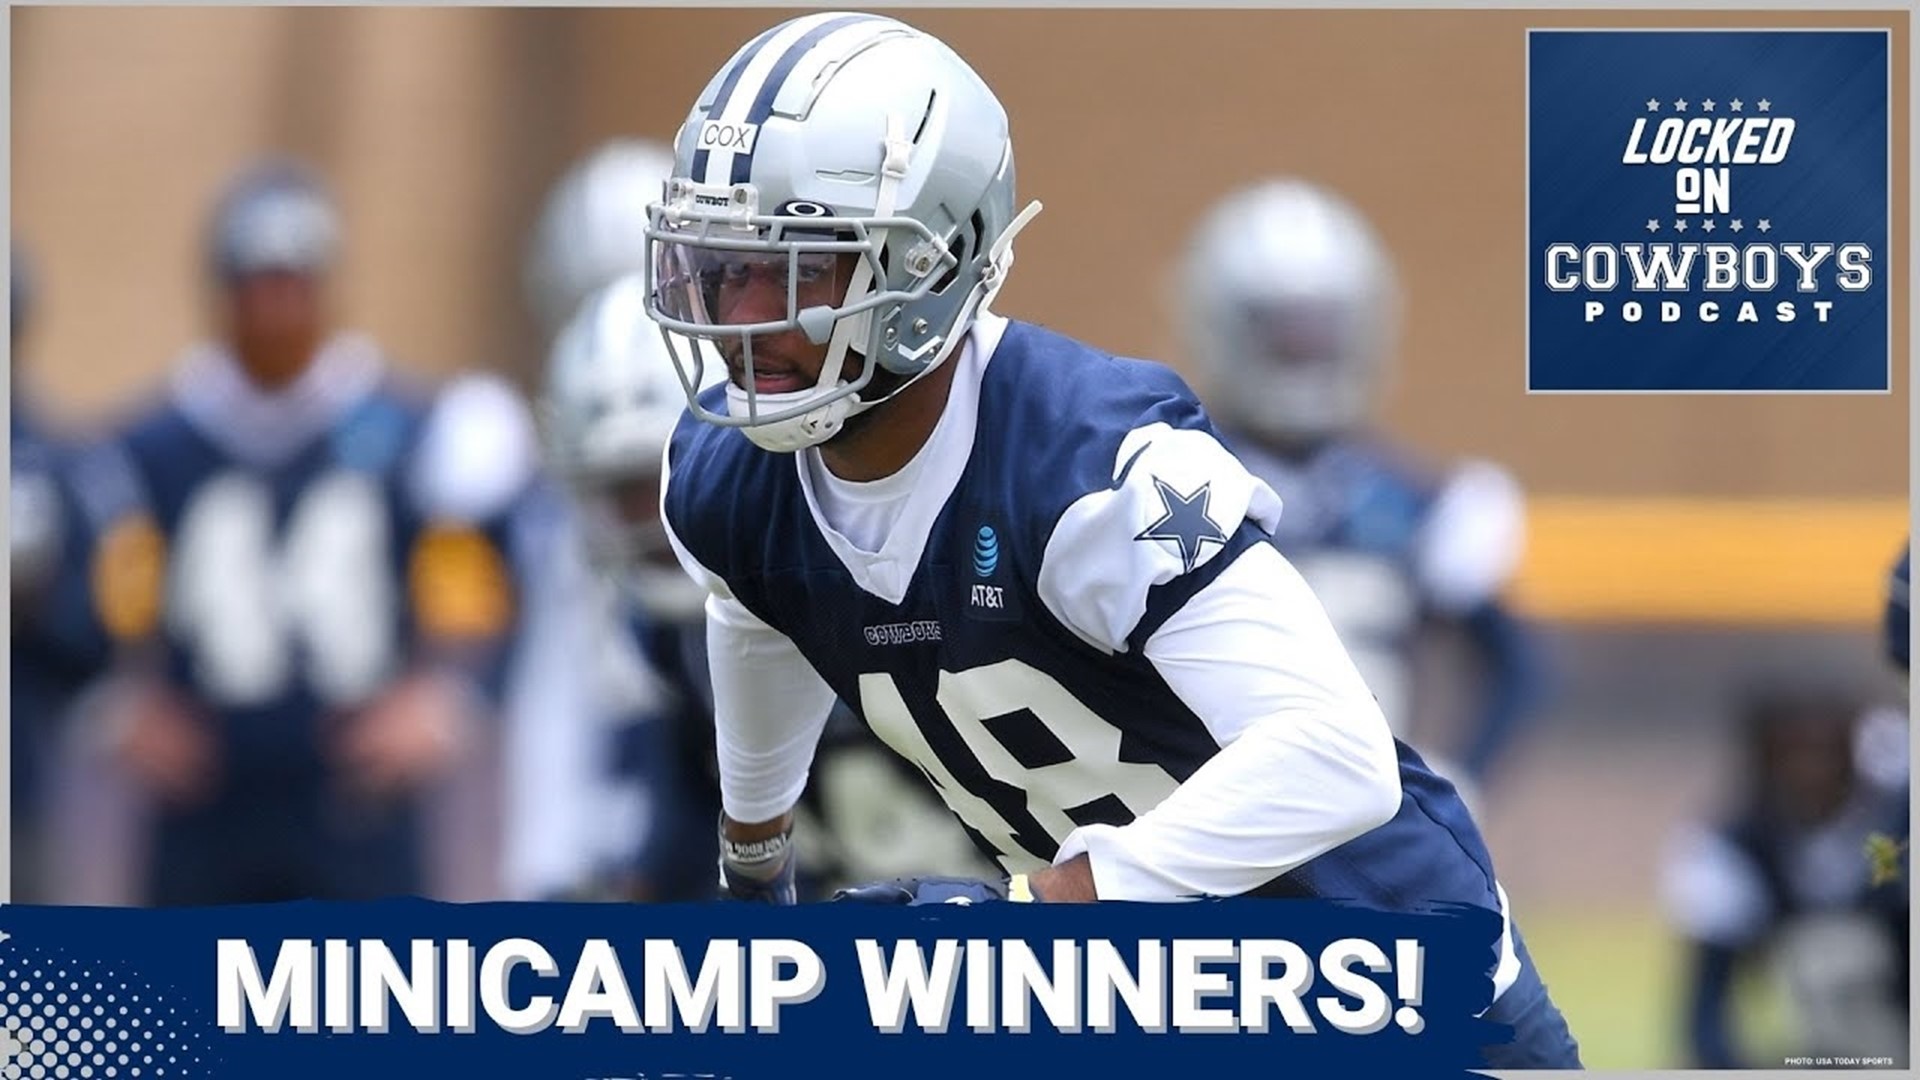 Marcus Mosher and Landon McCool discuss the biggest winners from Dallas Cowboys minicamp practice on Tuesday. They discuss a potential Jabril Cox breakout season.